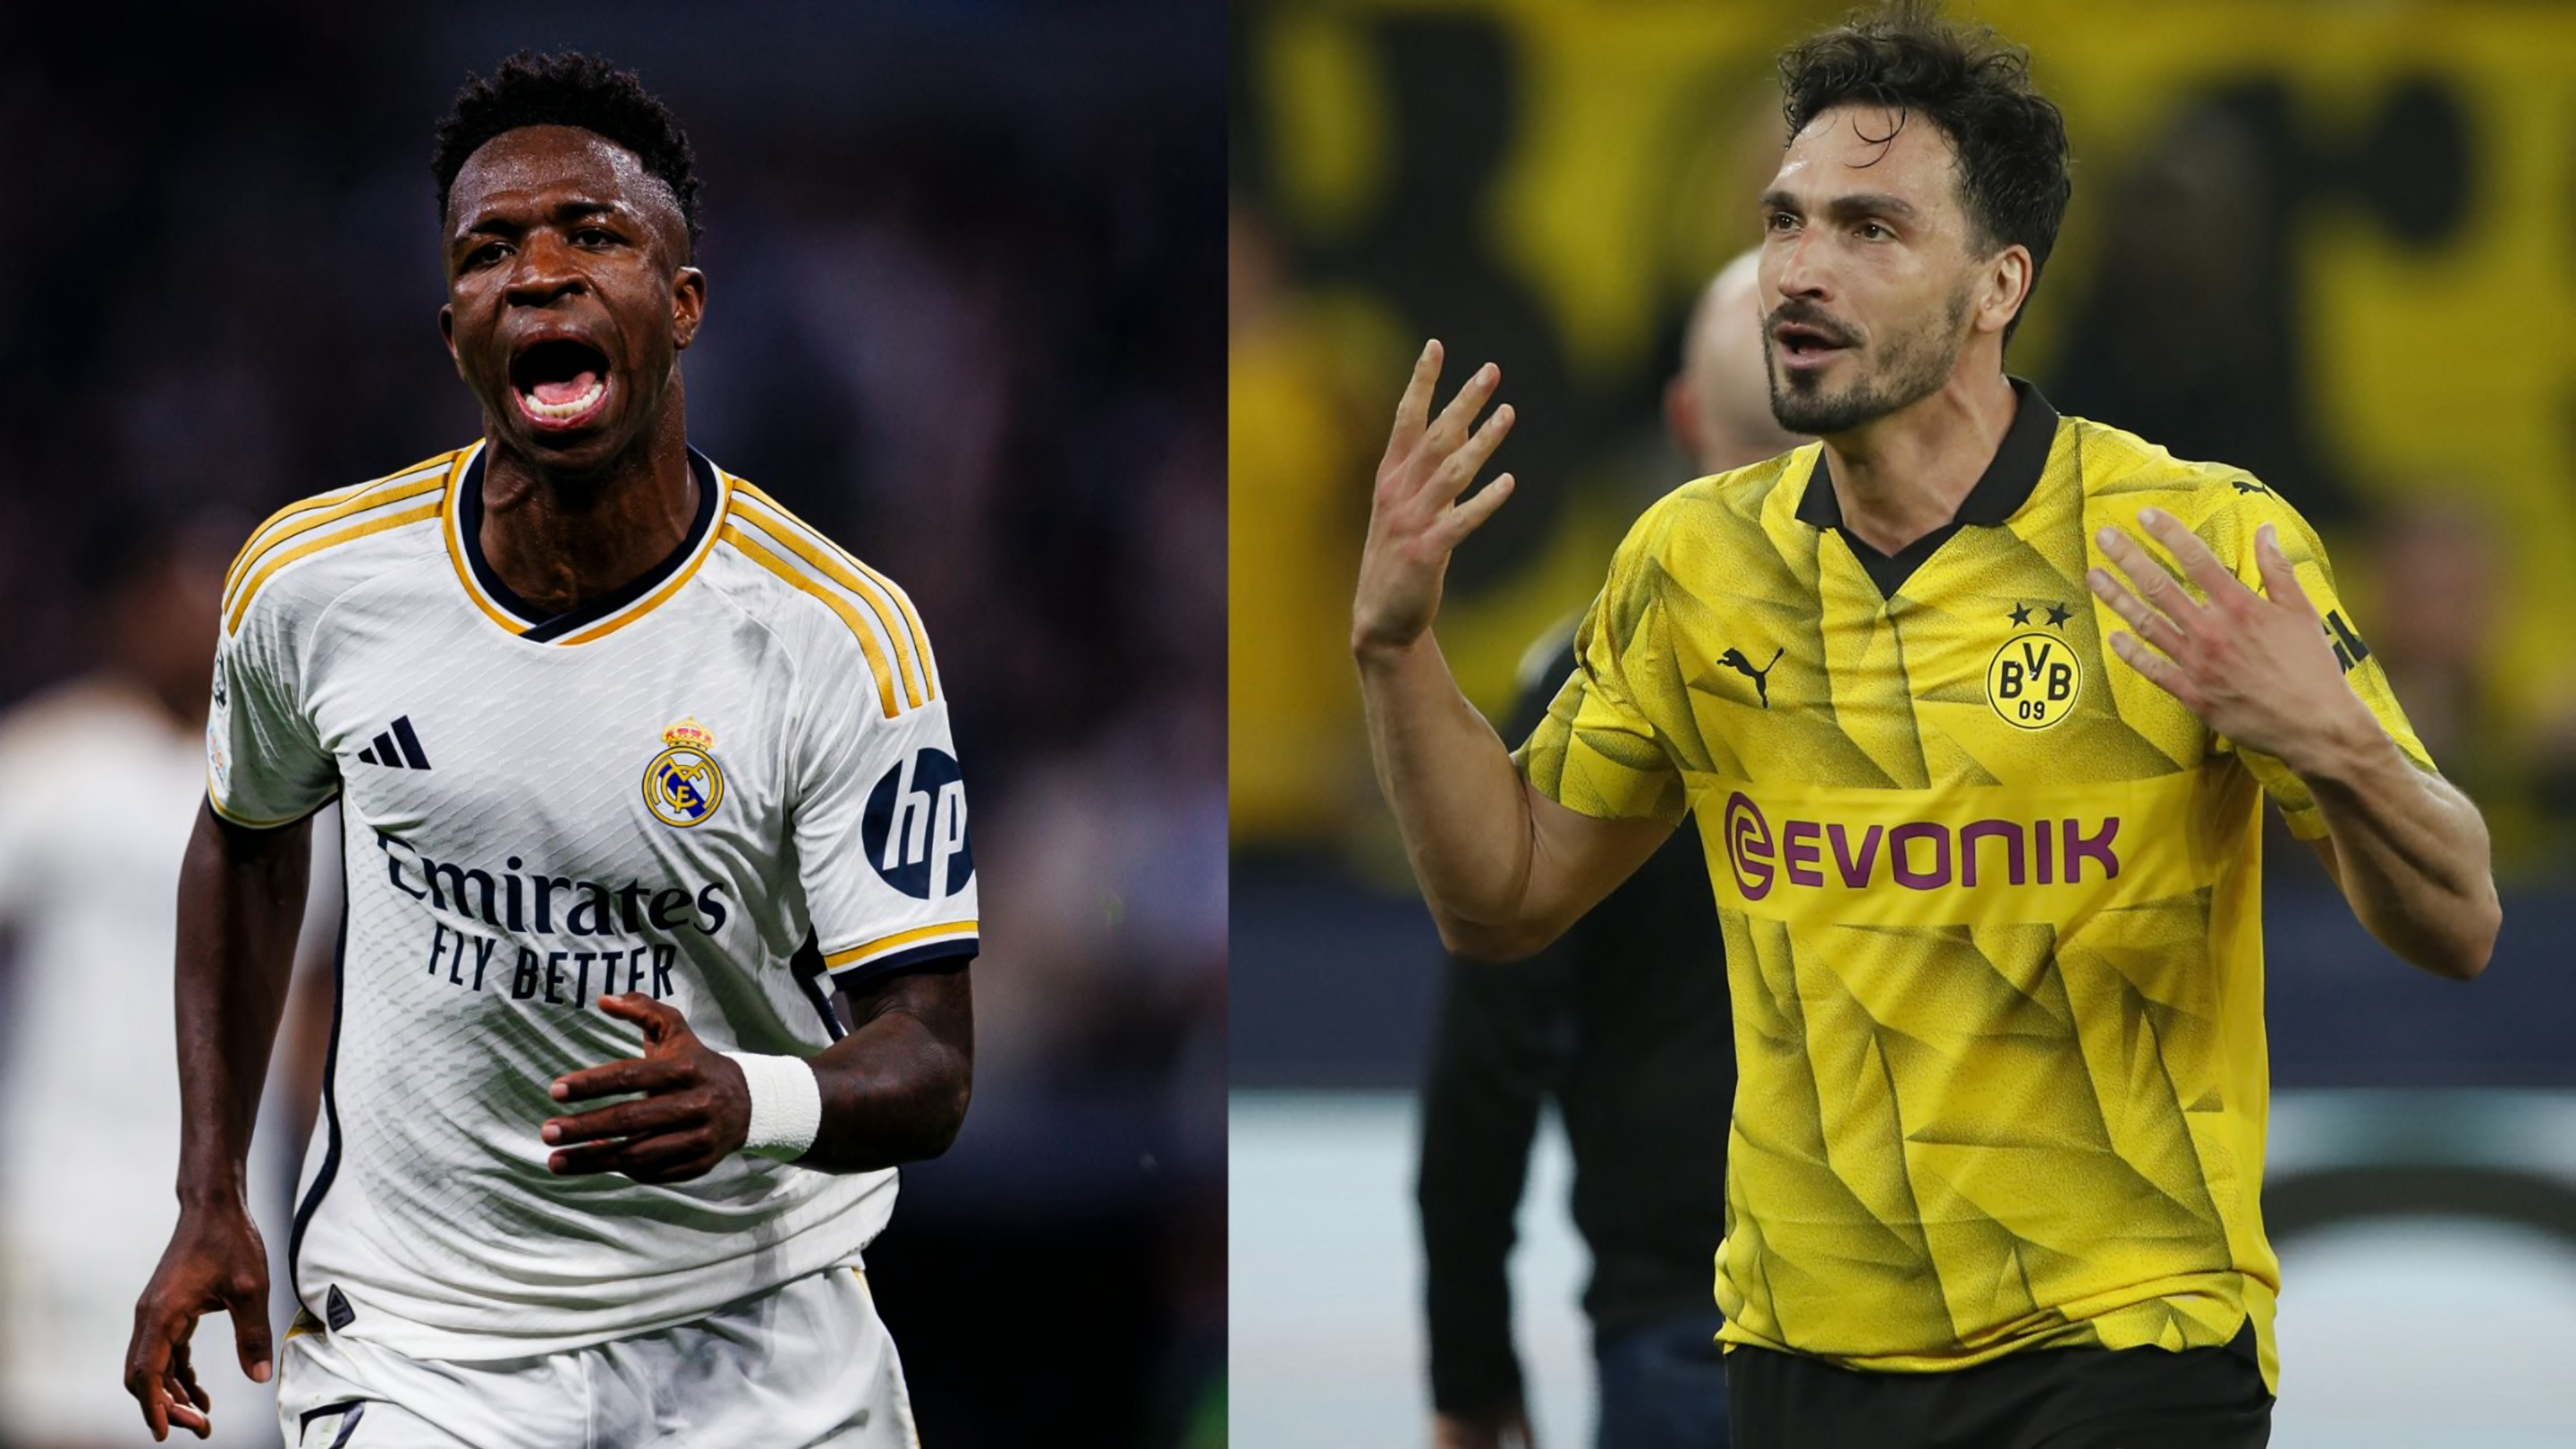 The 7 best players in the Champions League semi-finals - ranked